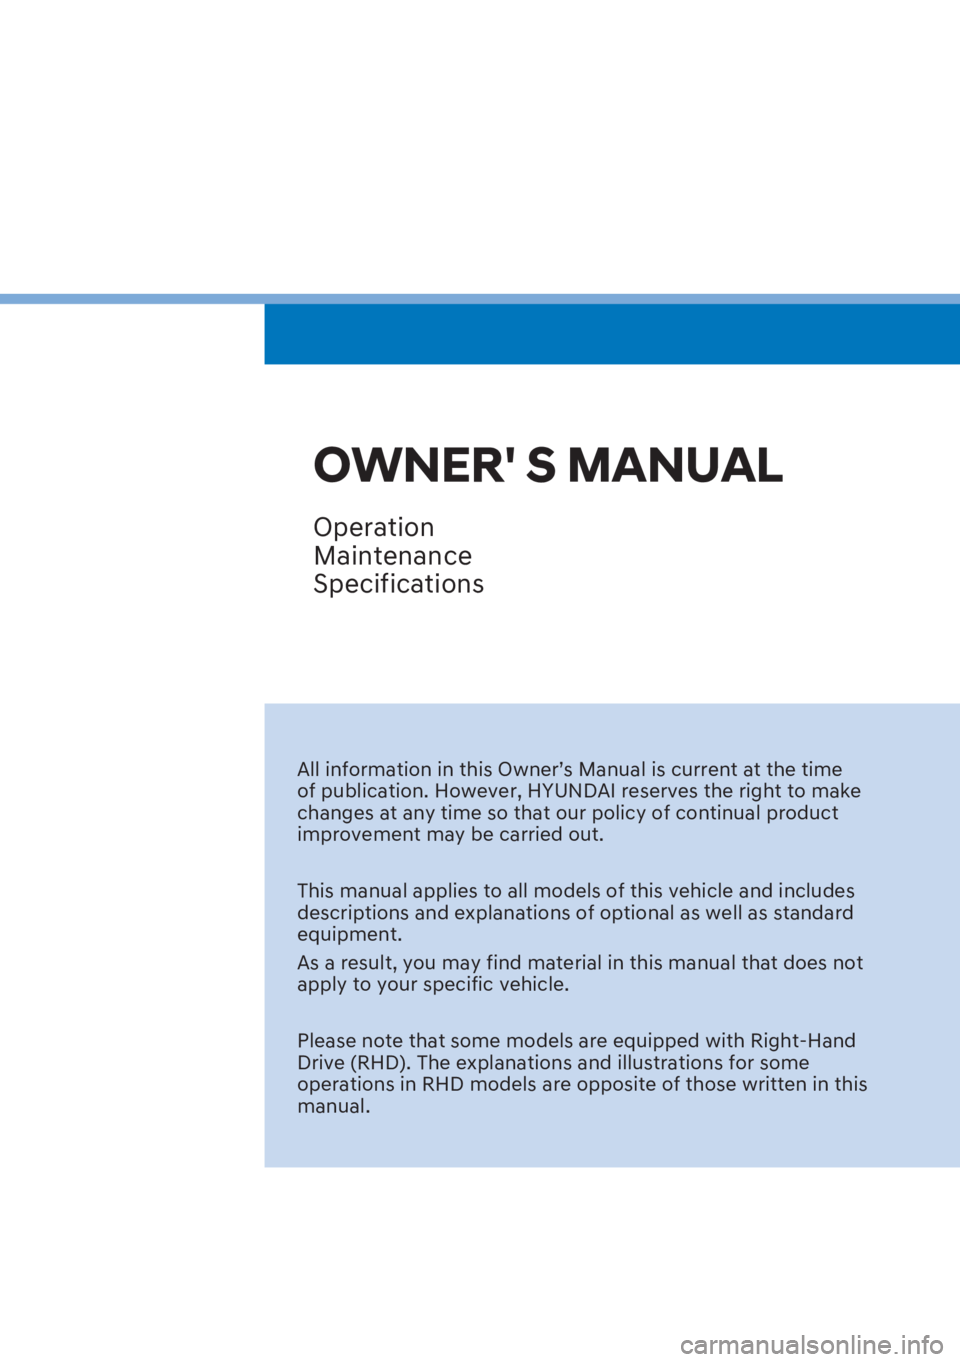 HYUNDAI I20 2023  Owners Manual OWNER S MANUAL
Operation
Maintenance
Specifications
All information in this Owner’s Manual is current at the time 
of publication. However, HYUNDAI reserves the right to make 
changes at any time s